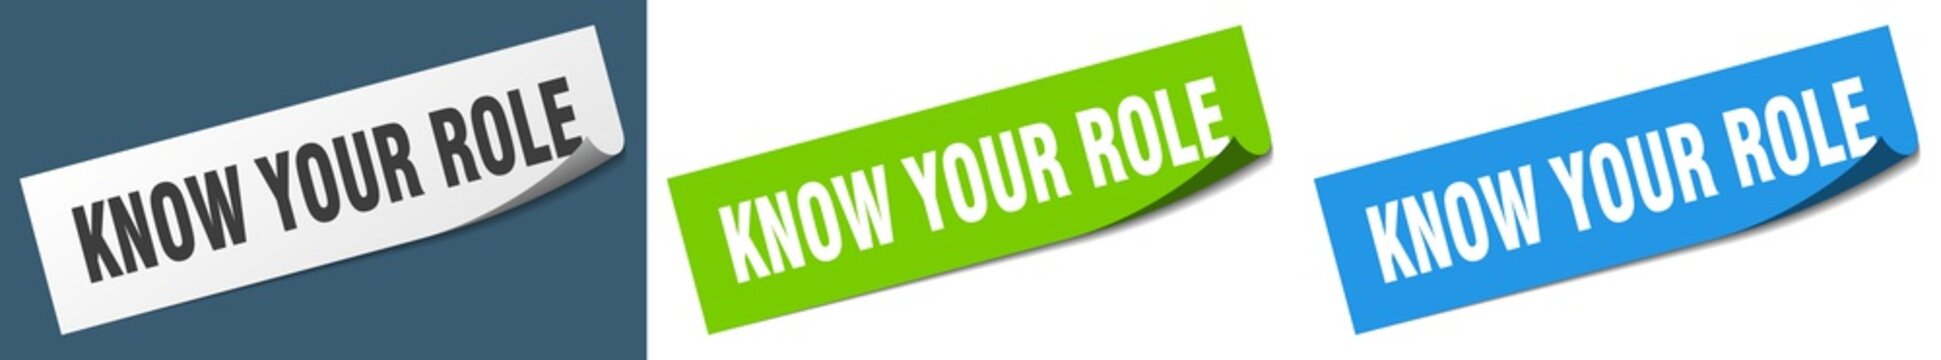 know your role paper peeler sign set. know your role sticker